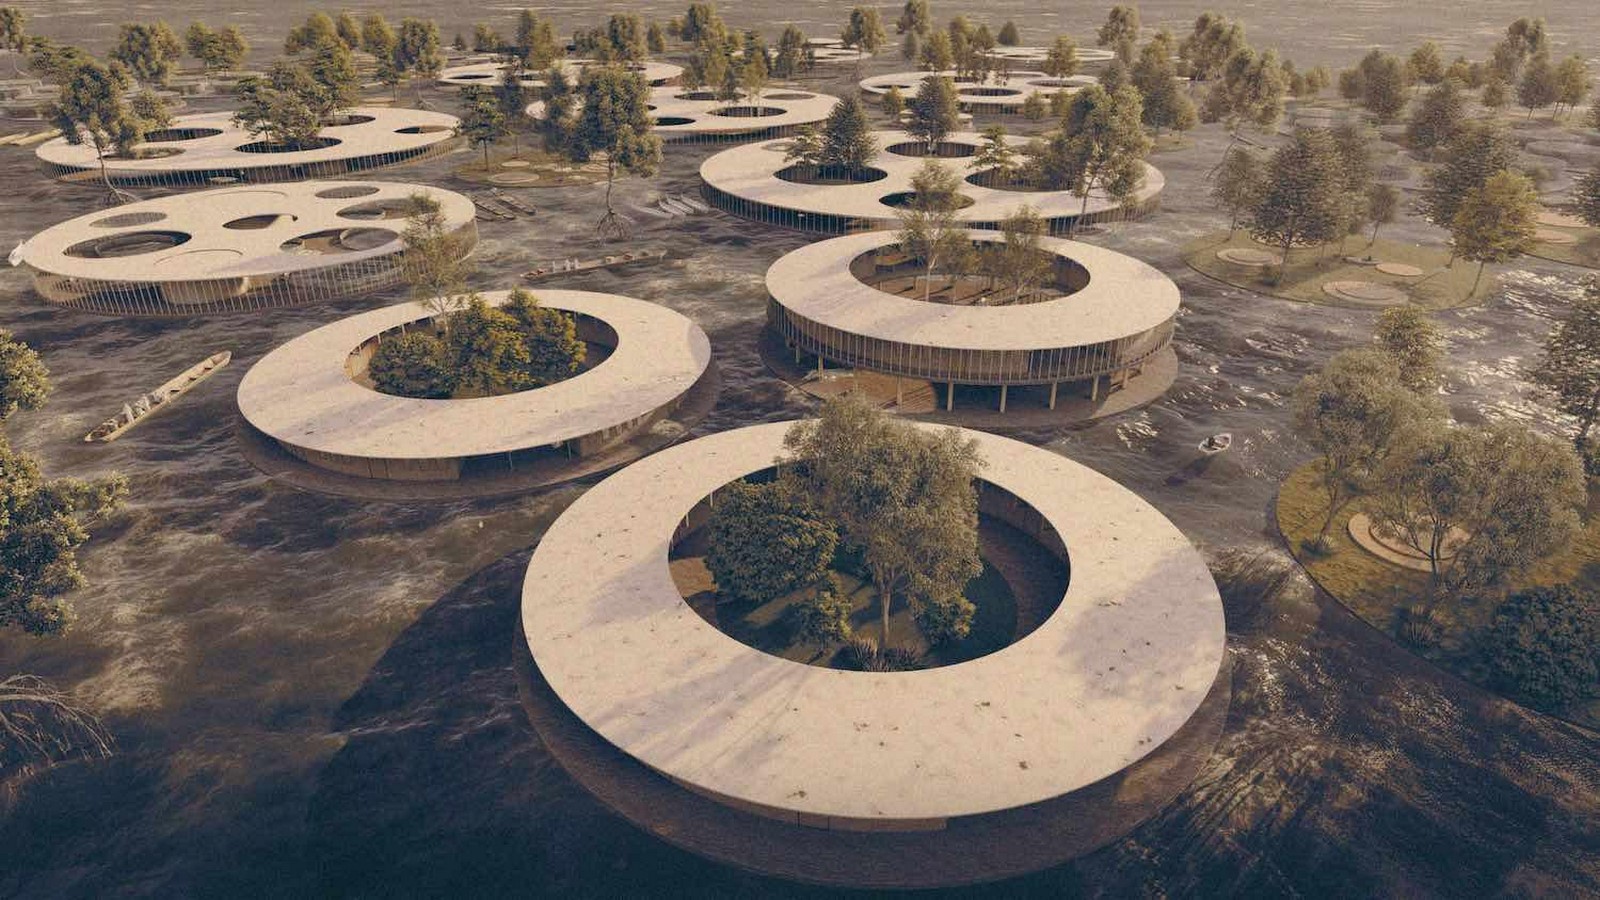 Architecture trends: Circular architecture - Sheet4